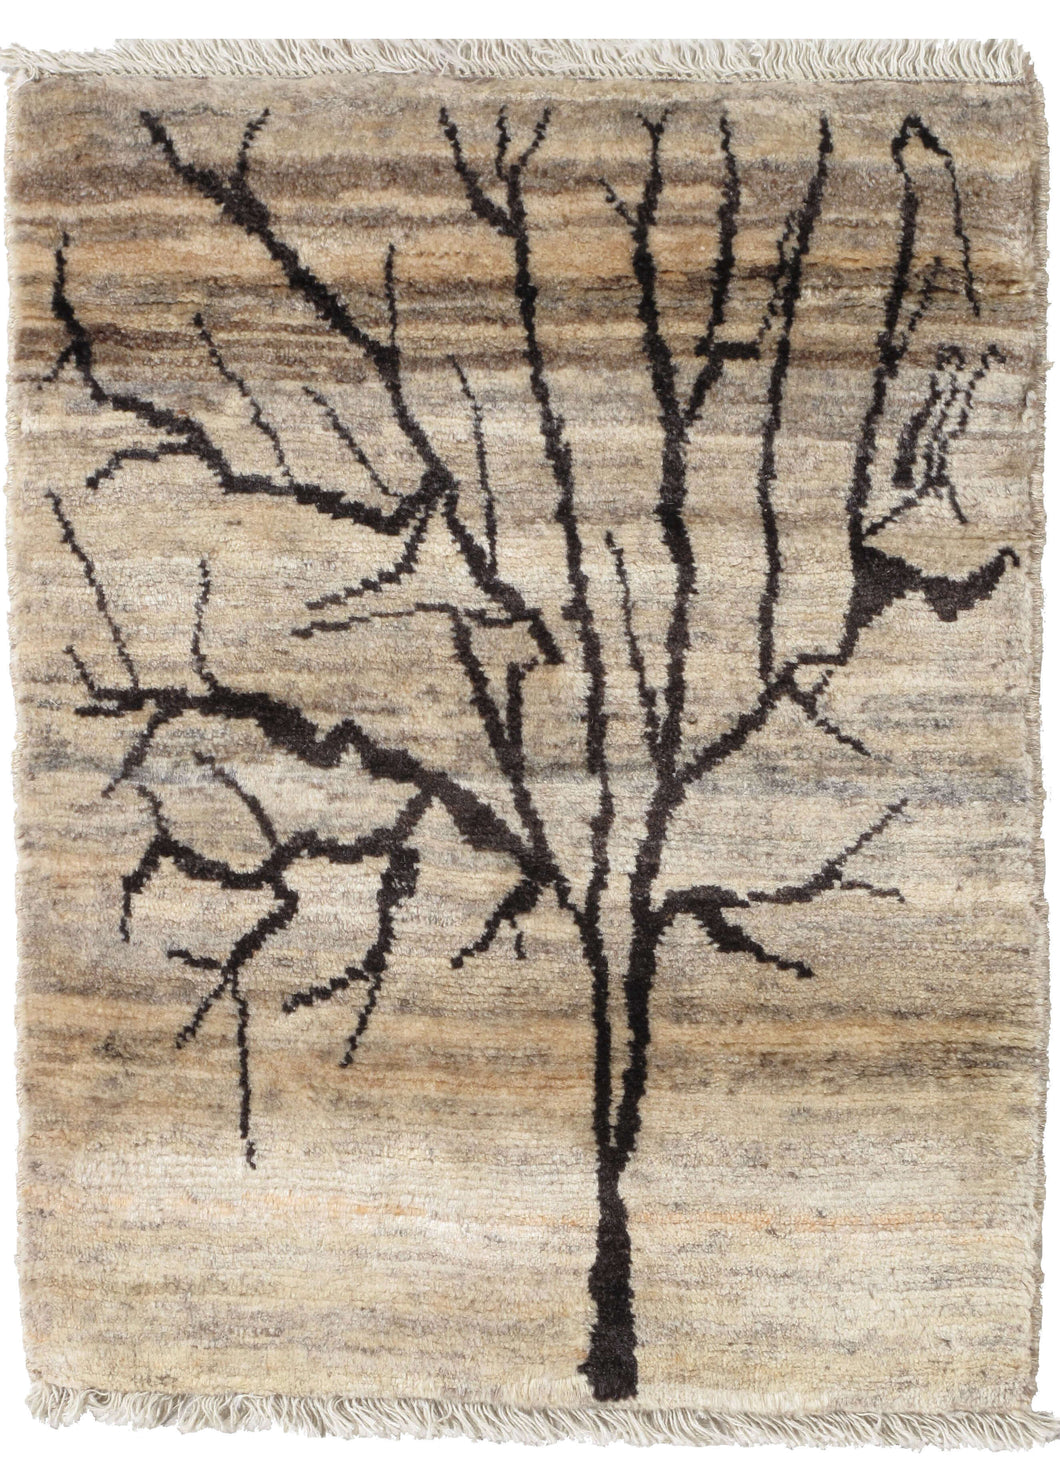 This Tree Gabbeh Rug features a simple and very organic rendering of a tree in dark brown barren of any leave on a variegated cream and brown ground.  The simple form is naturalistic in its asymmetry and in the way the branches spread out into various tributaries. The pile is densely woven, making this a plush rug. Great for the floor or the wall.